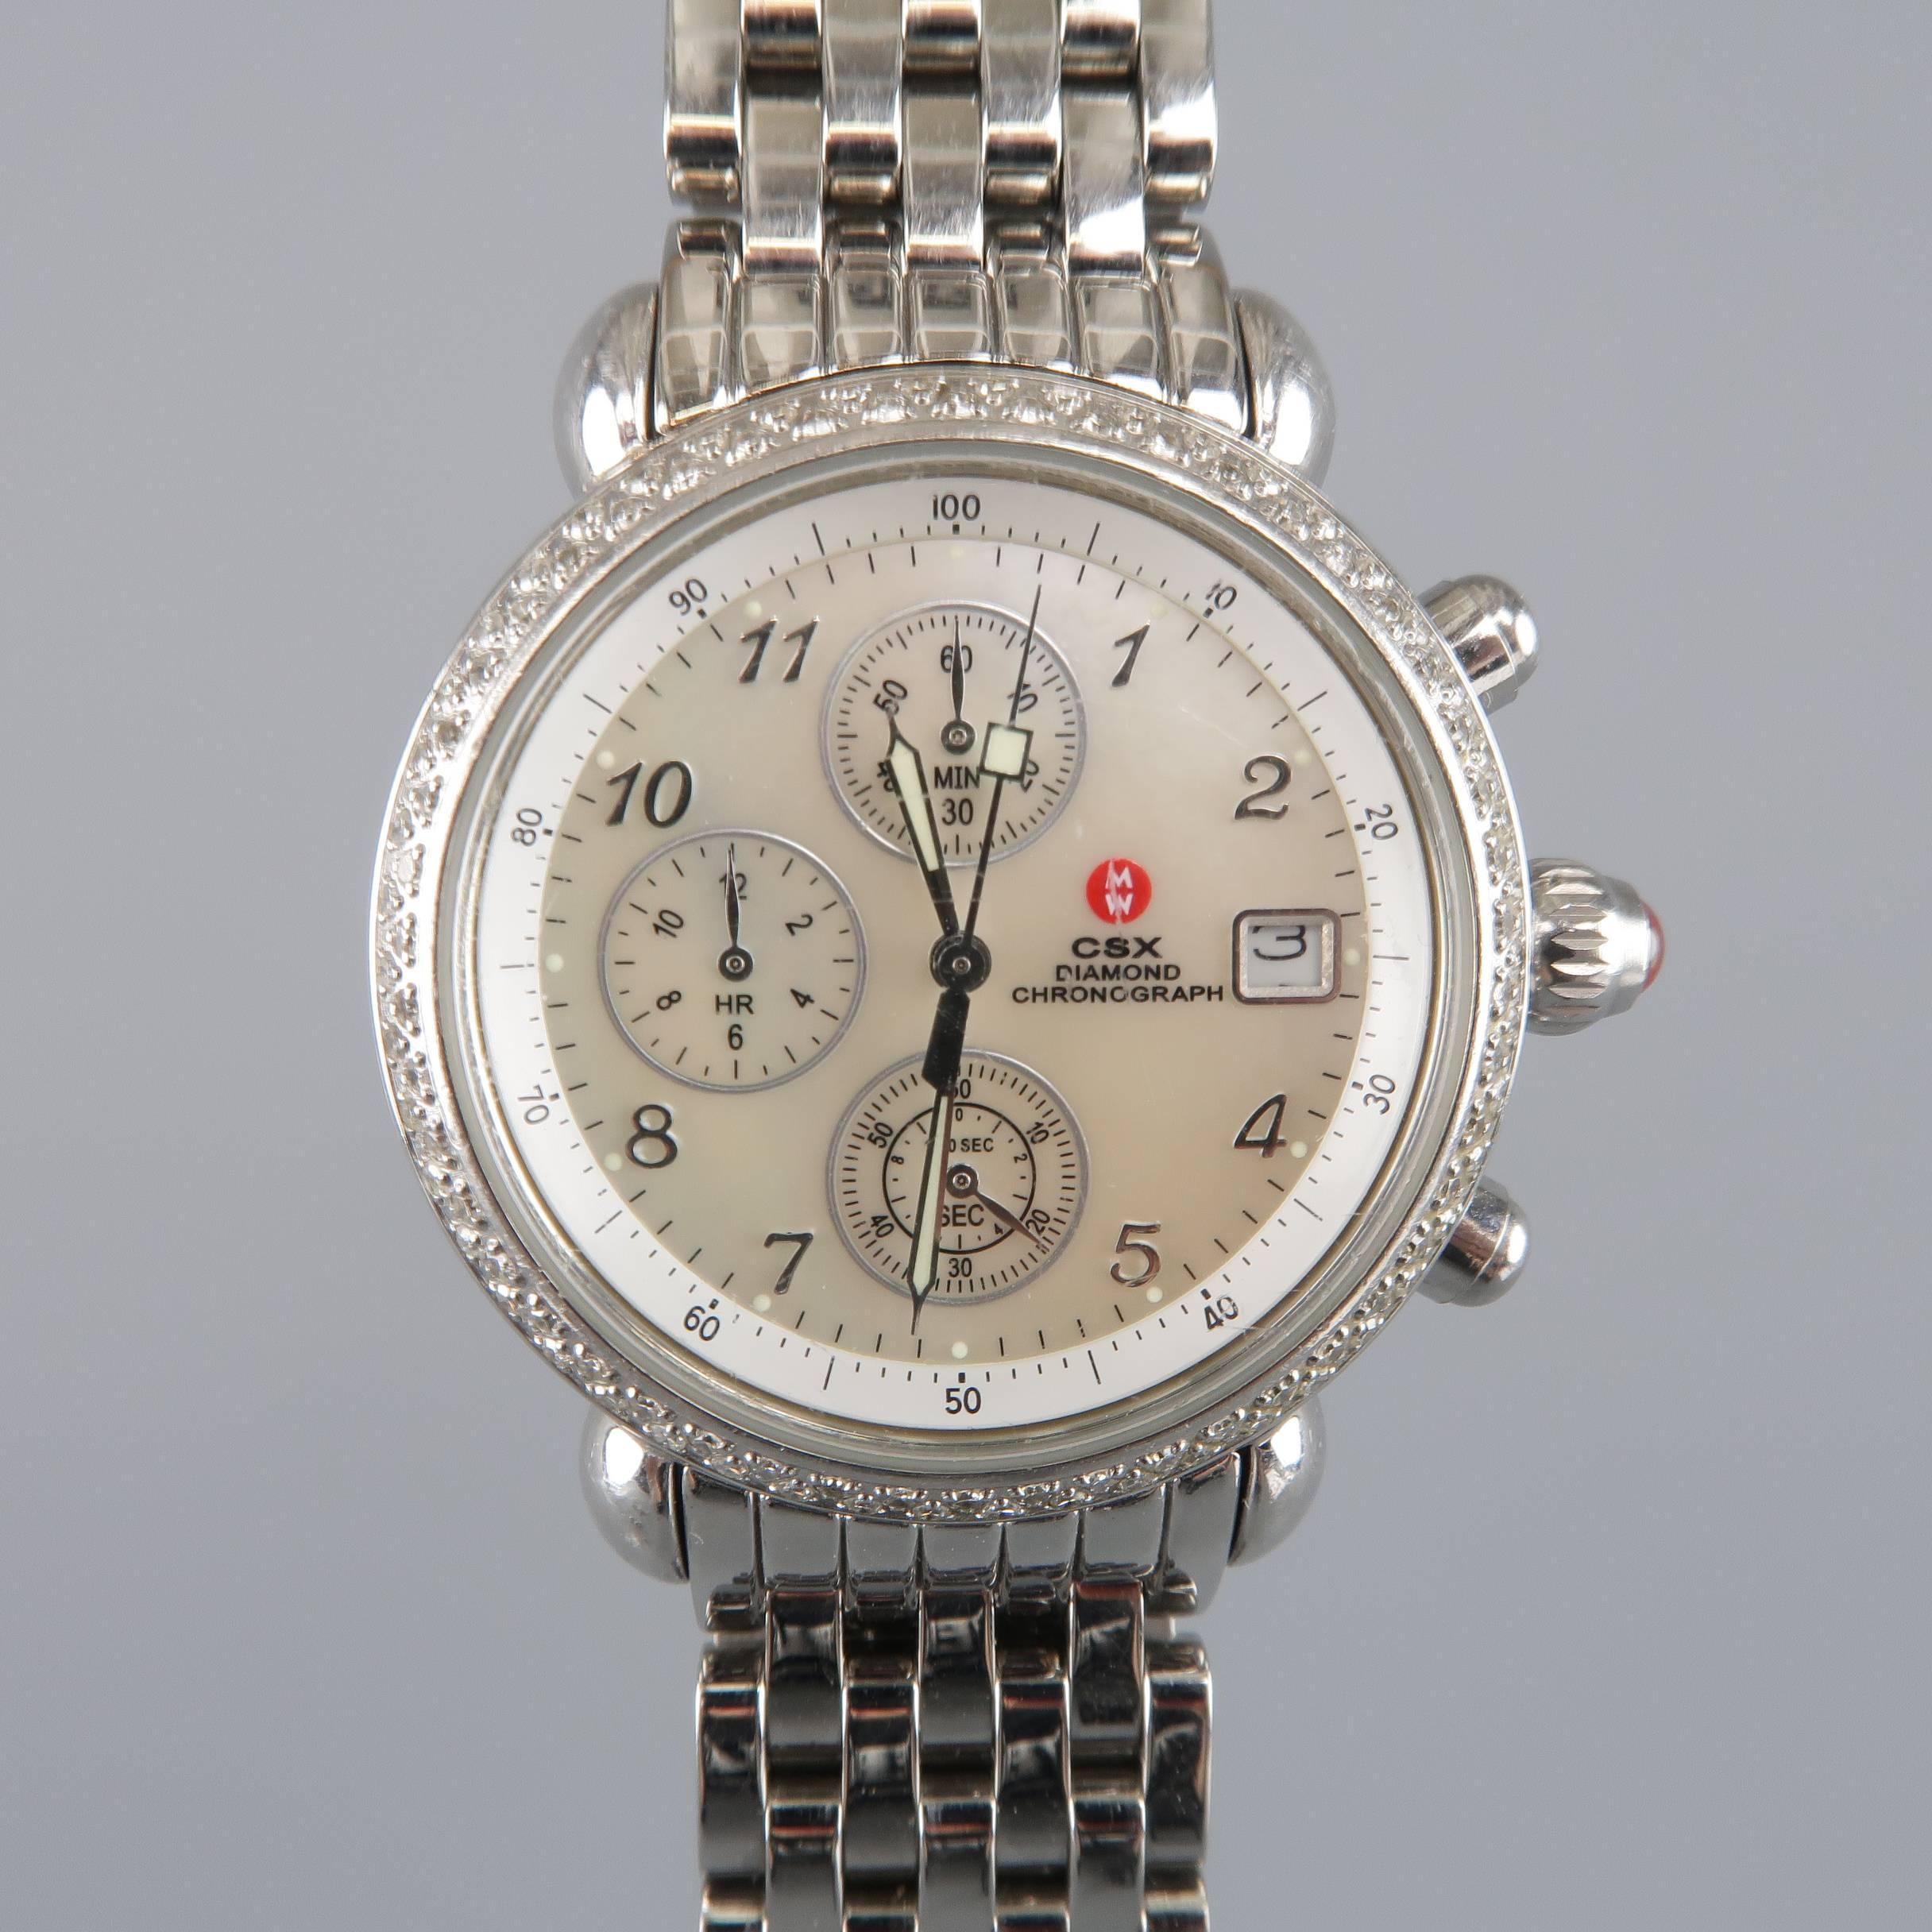 Michele Csx Diamond Chronograph  watch comes in silver tone stainless steel and features a round, mother of pearl clock face, with diamond frame. Includes five extra crocodile leather bands. Repaired and wear throughout bands. As-is. Includes